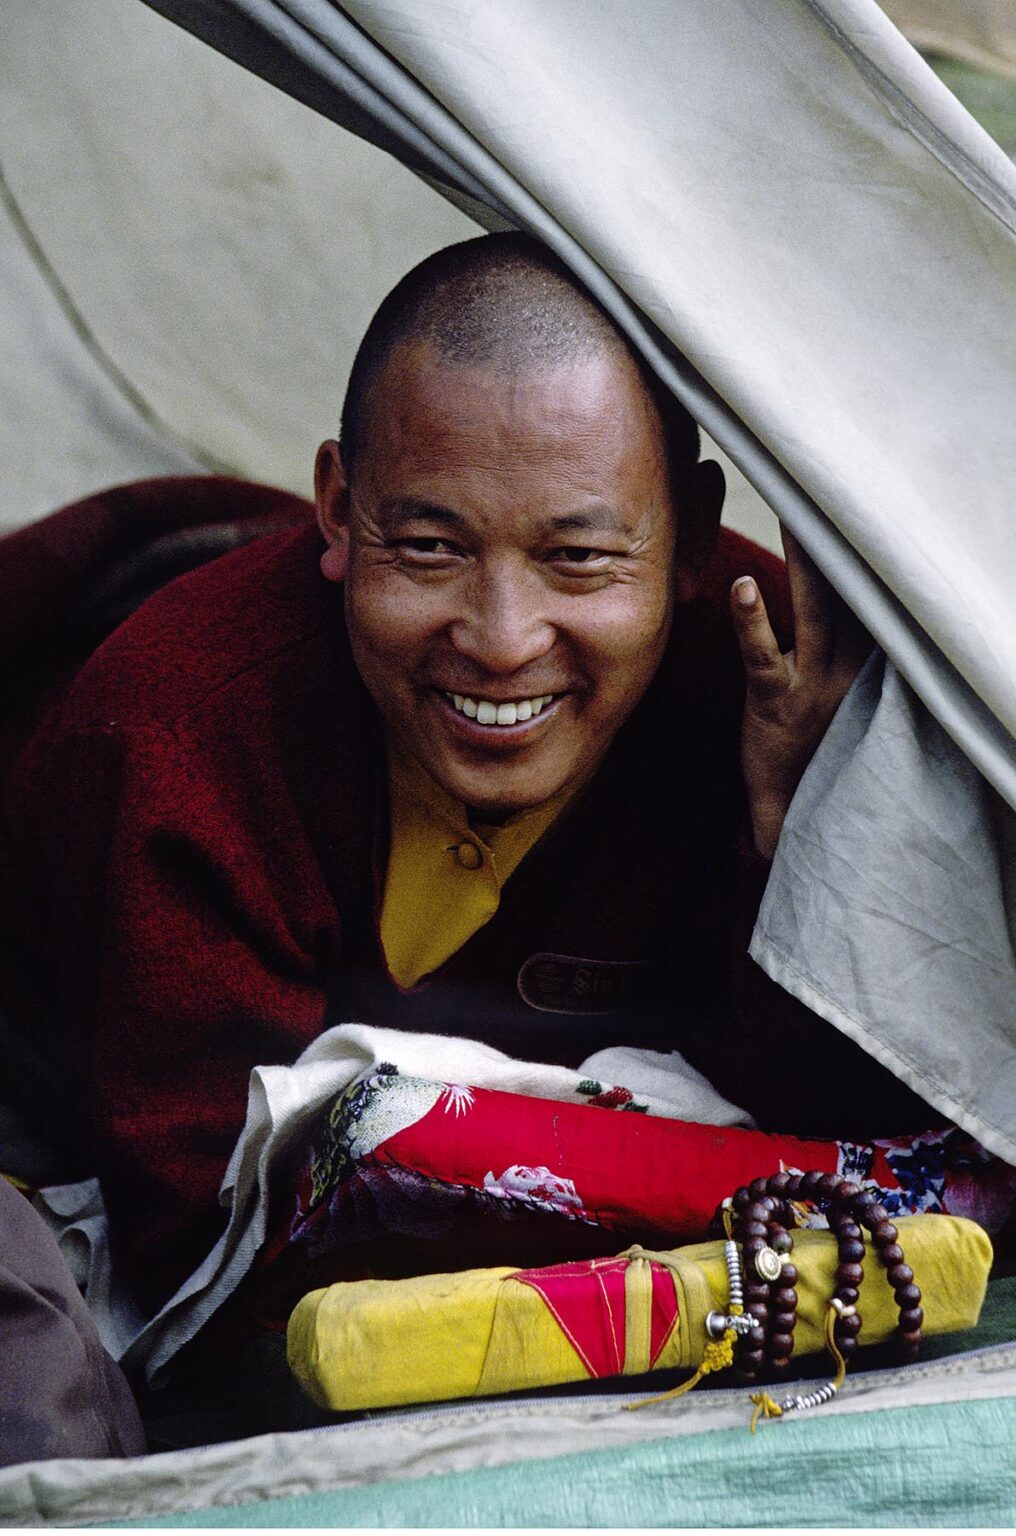 A high ranking Tibetan Buddhist MONK from MUSTANG in his TENT with his rosary and prayer book - DOLPO DISTRICT, NEPAL